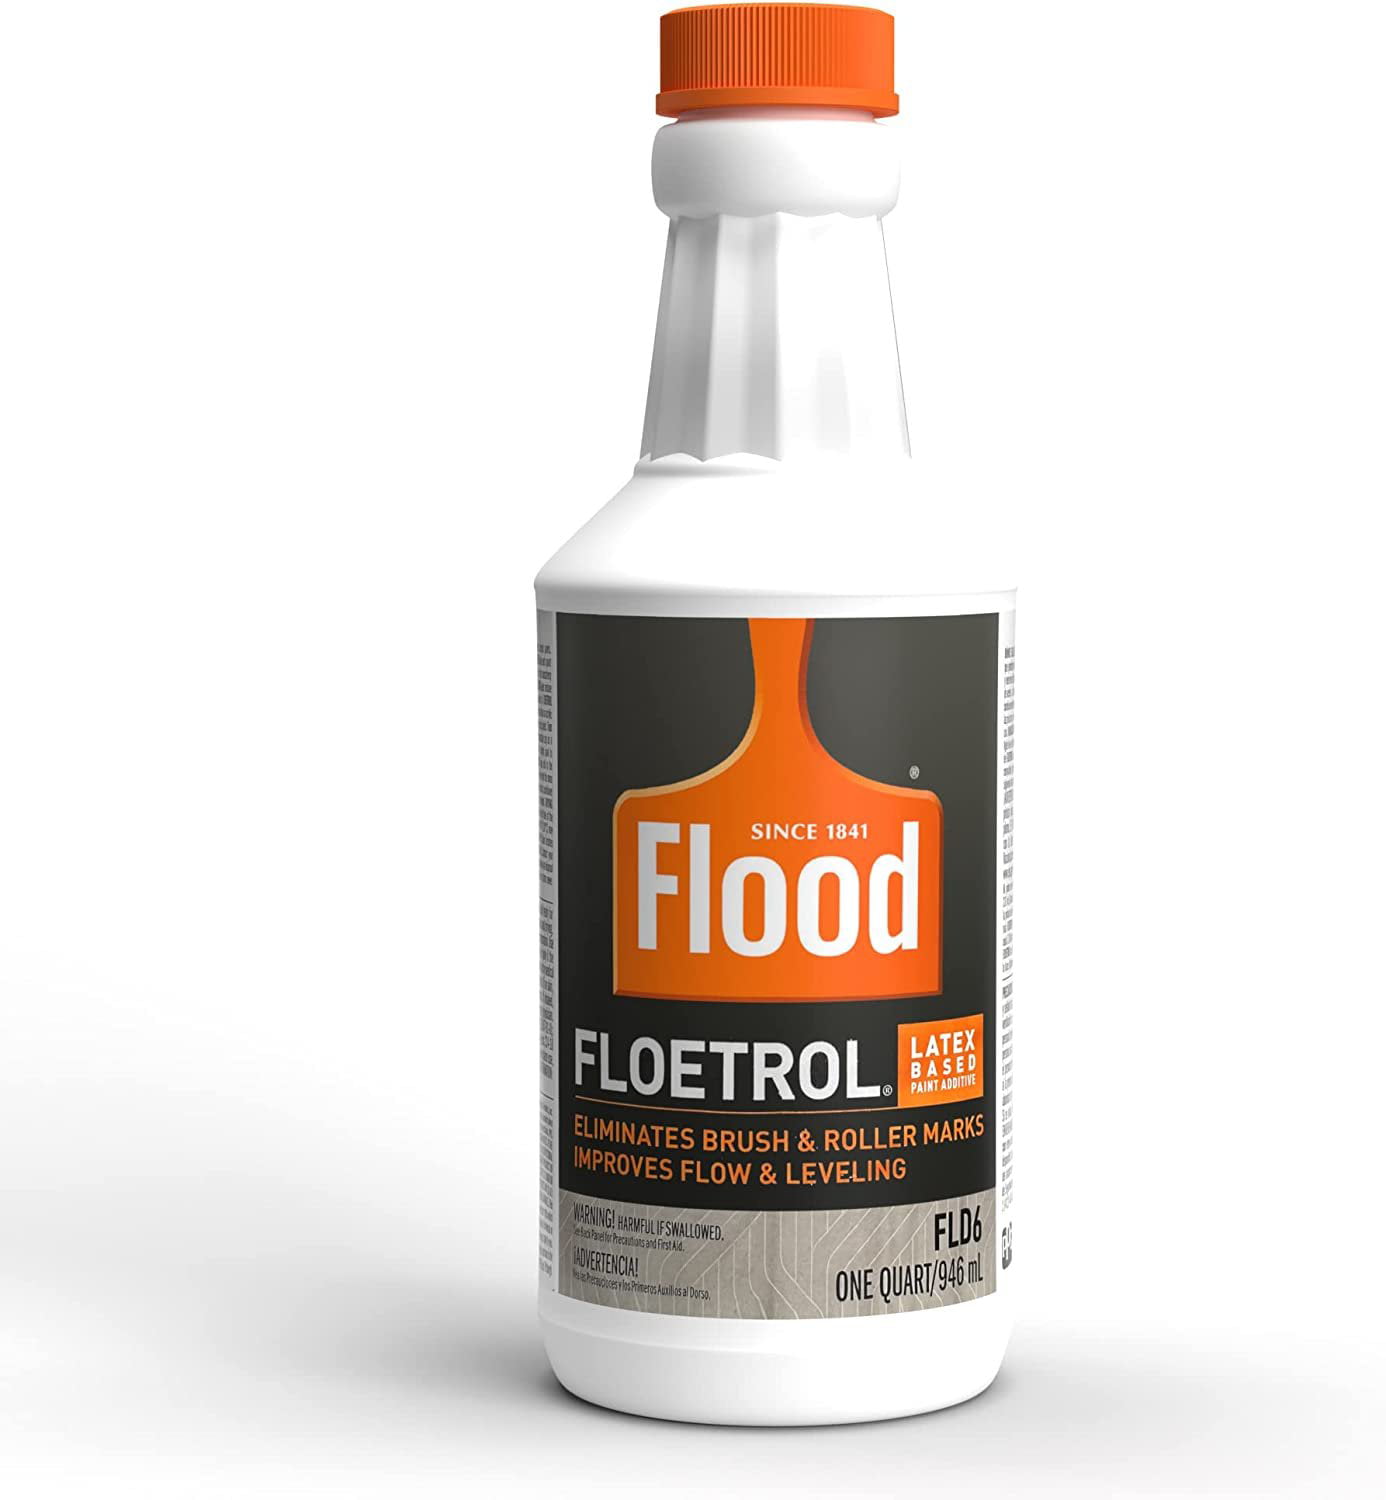 Floetrol-flood FINE Filter for Paint Pouring/ Fluid Painting Fits